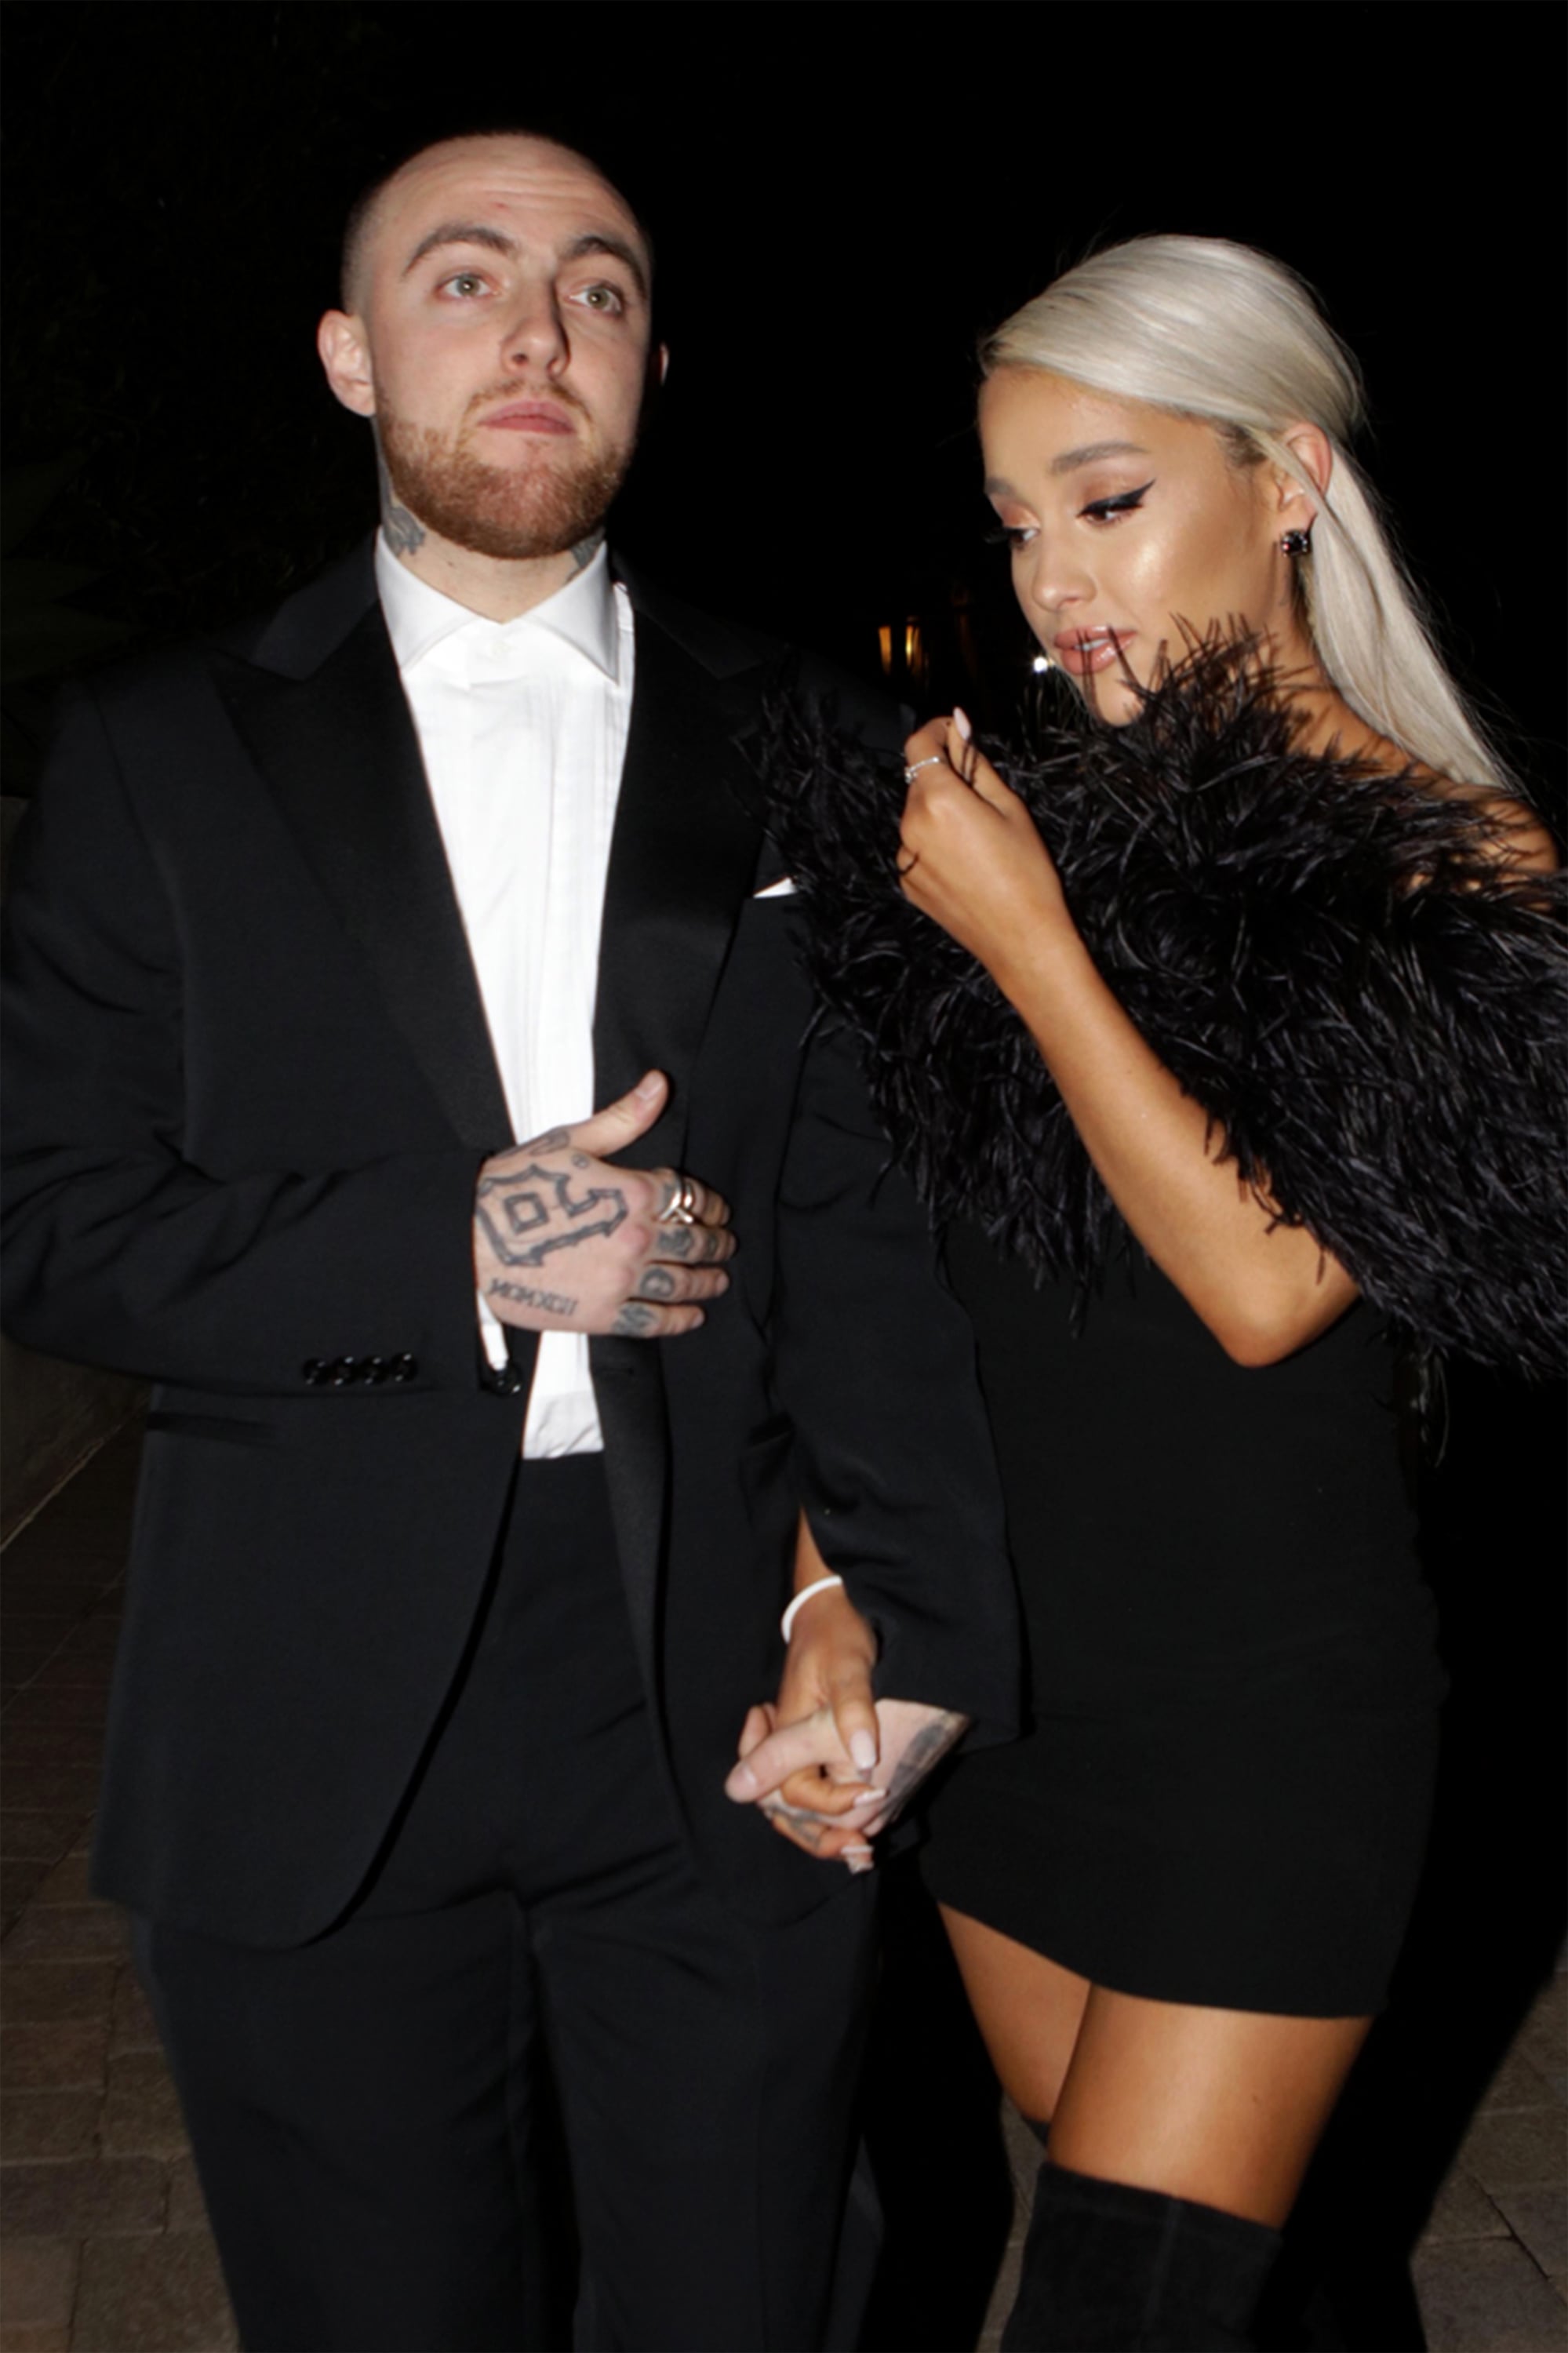 LOS ANGELES, CA - MARCH 04:  Rapper Mac Miller and singer Ariana Grande are seen attending an Oscar party on March 4, 2018 in Los Angeles, California.  (Photo by GC Images)